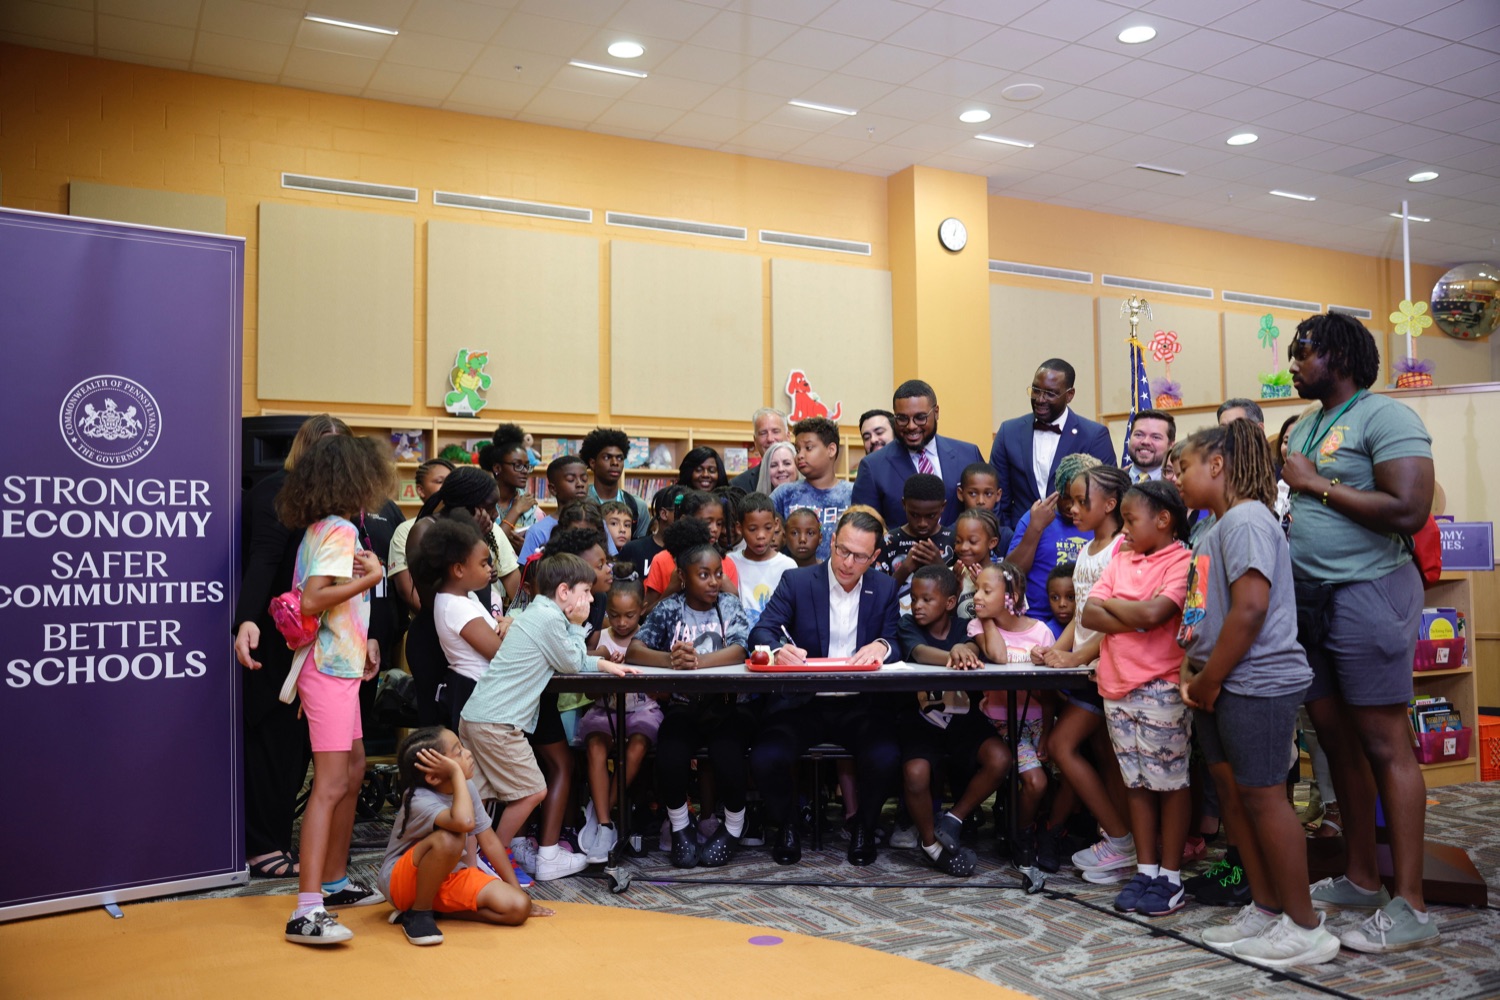 Governor Shapiro Signs Ceremonial Budget Bill Creating Universal Free Breakfast, Making Historic Investments in Public Education During Visit to Allegheny County Elementary School on August 8, 2023.<br><a href="https://filesource.amperwave.net/commonwealthofpa/photo/23563_Gov_Education_DZ_006.JPEG" target="_blank">⇣ Download Photo</a>